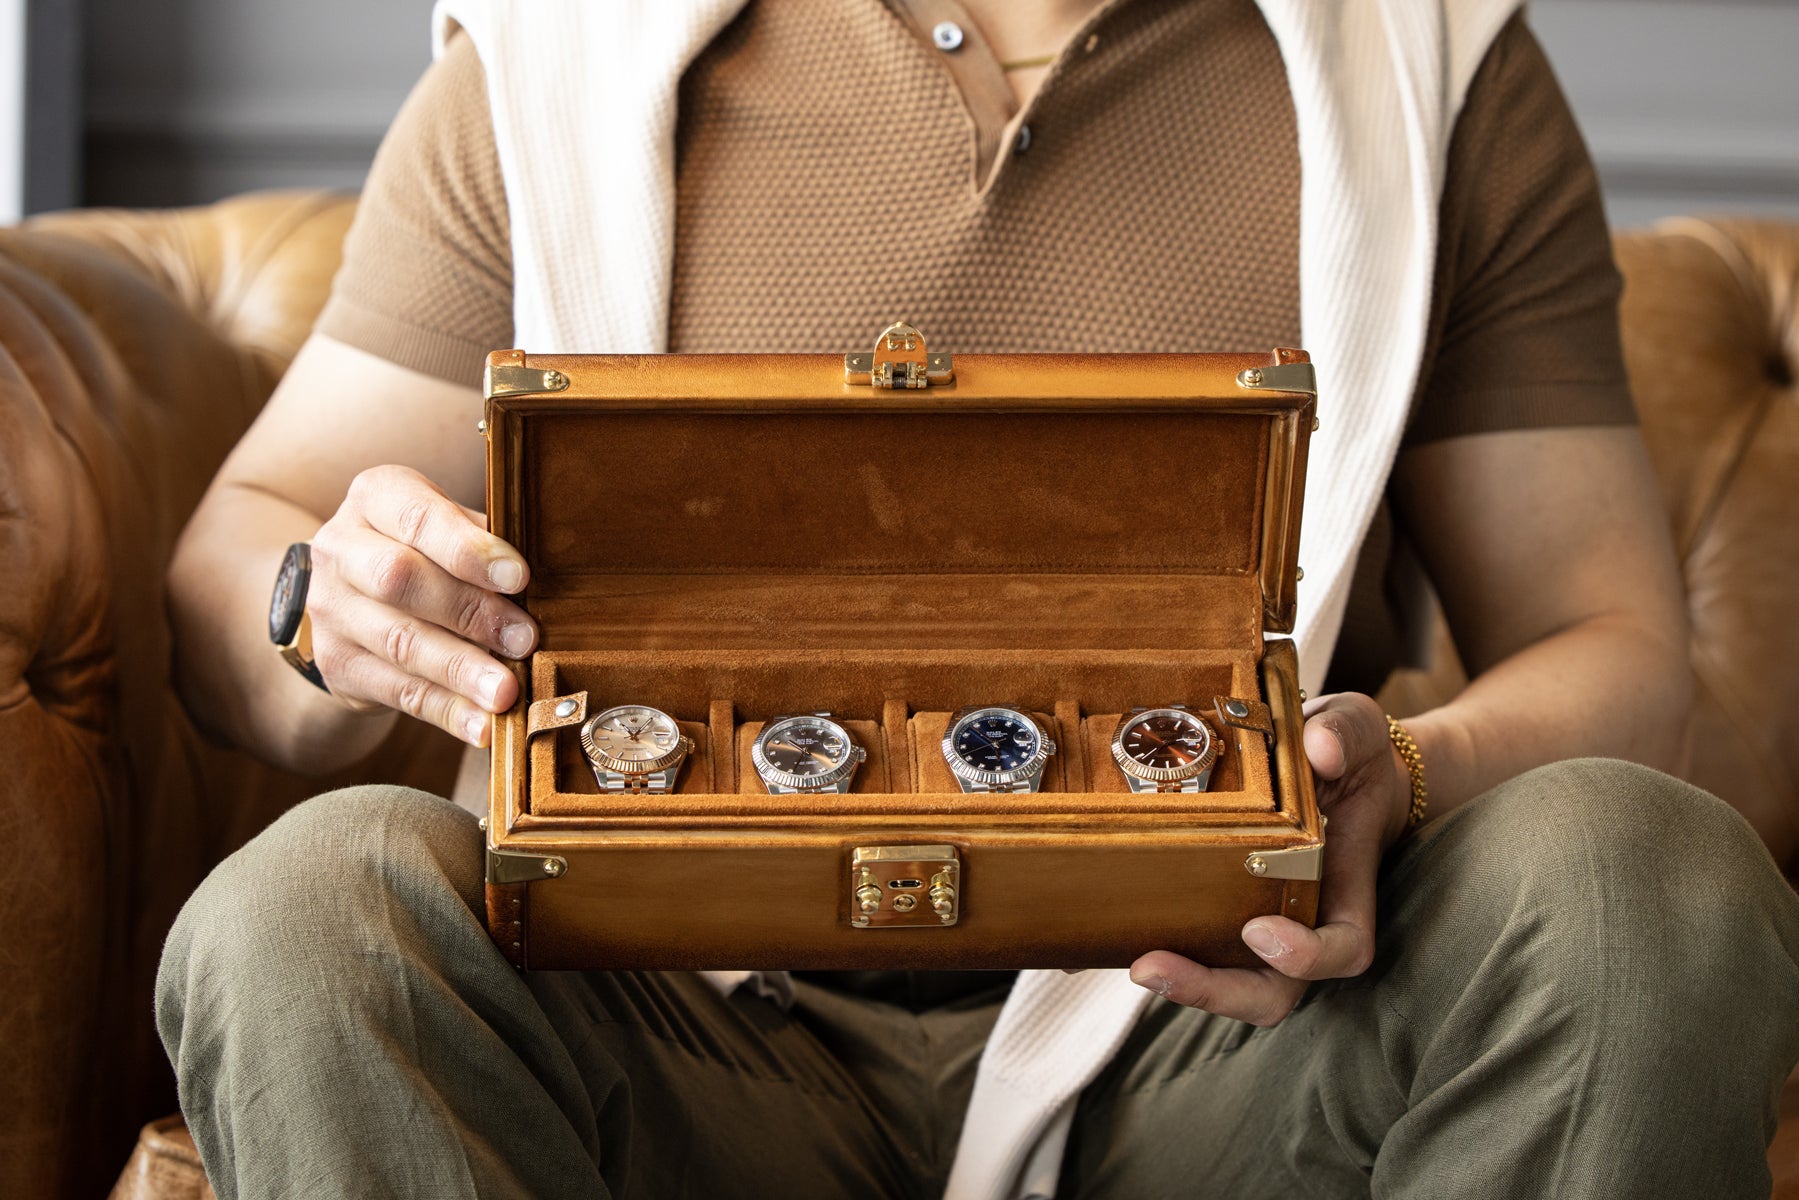 Bosphorus LeatherPetra Watch Case - Patina Honey Brown For 4 Watches